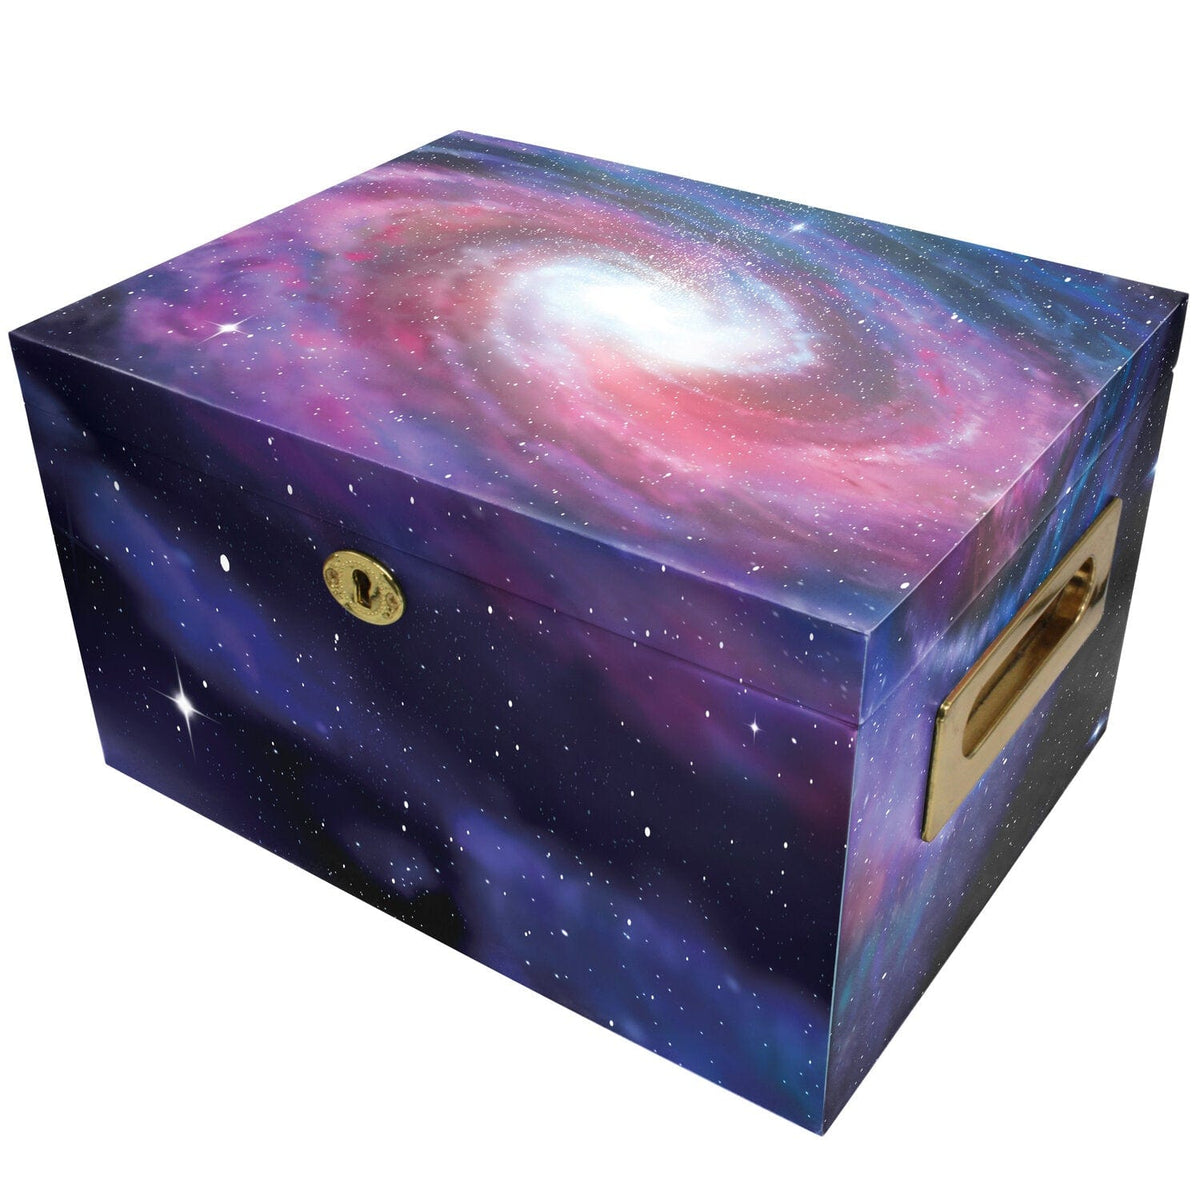 Commemorative Cremation Urns Home &amp; Garden Urn Collection Chest Celestial Galaxy Memorial Collection Chest Cremation Urn